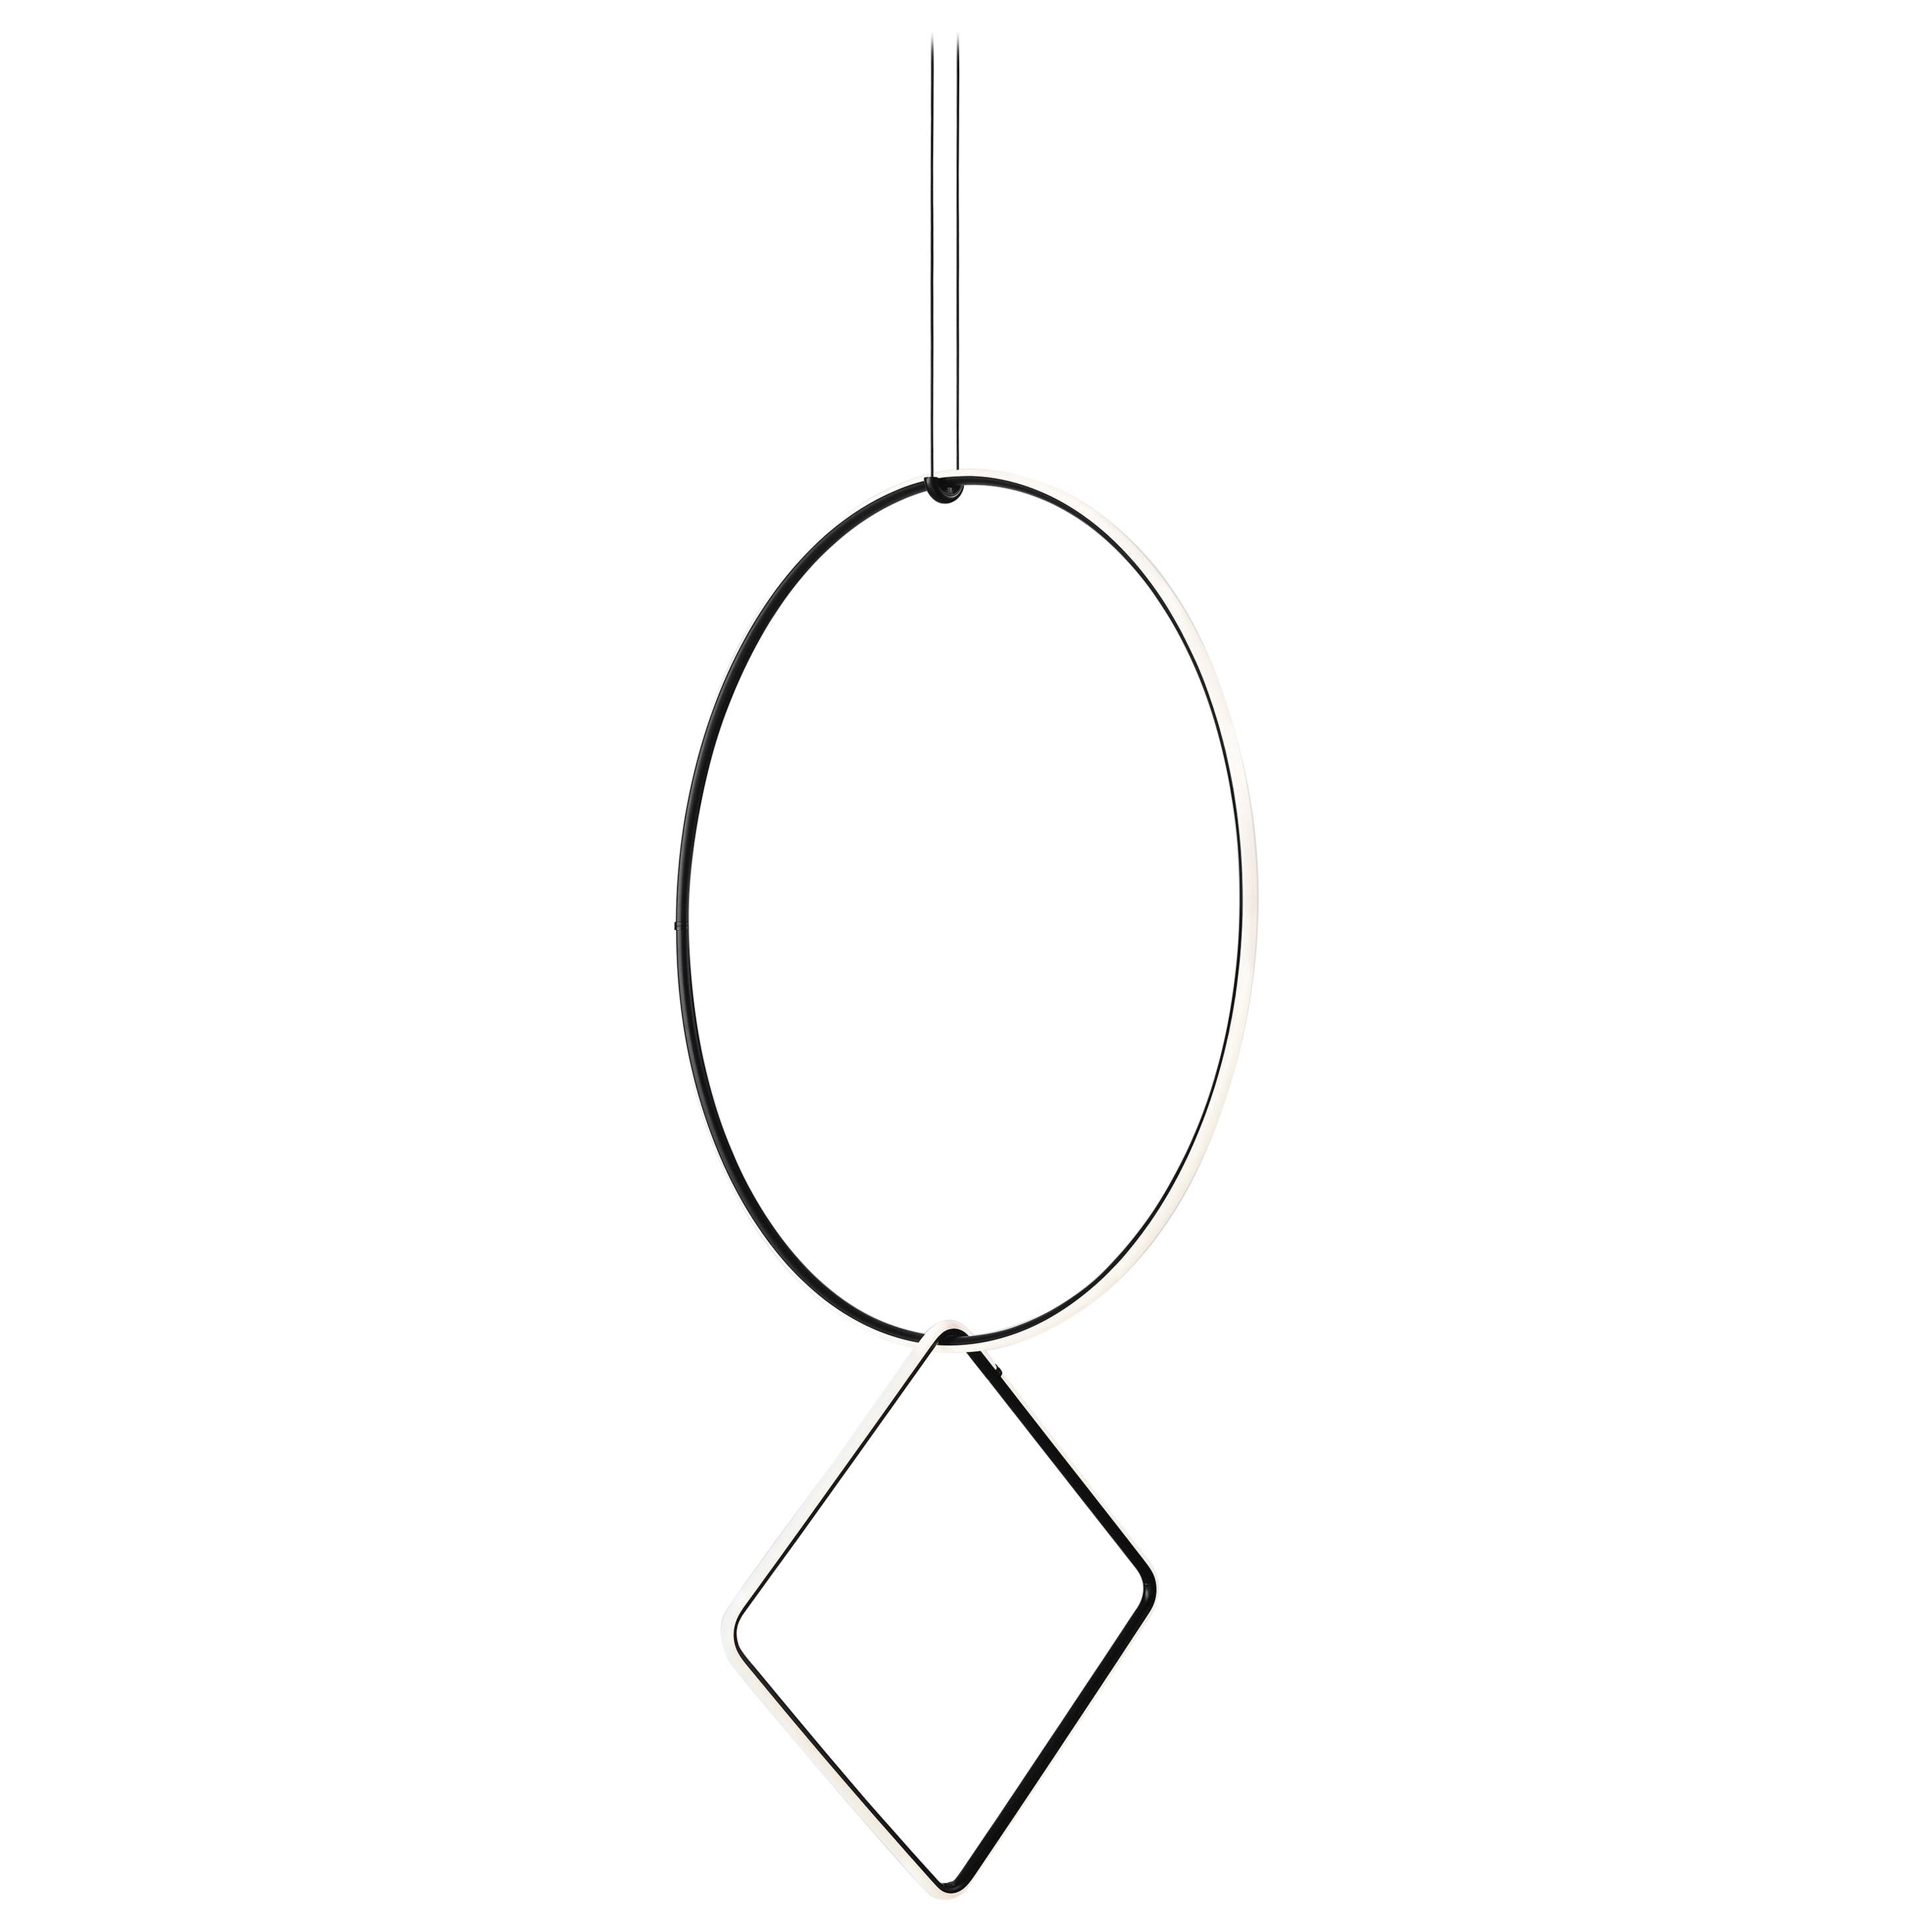 FLOS Large Circle and Square Arrangements Light by Michael Anastassiades